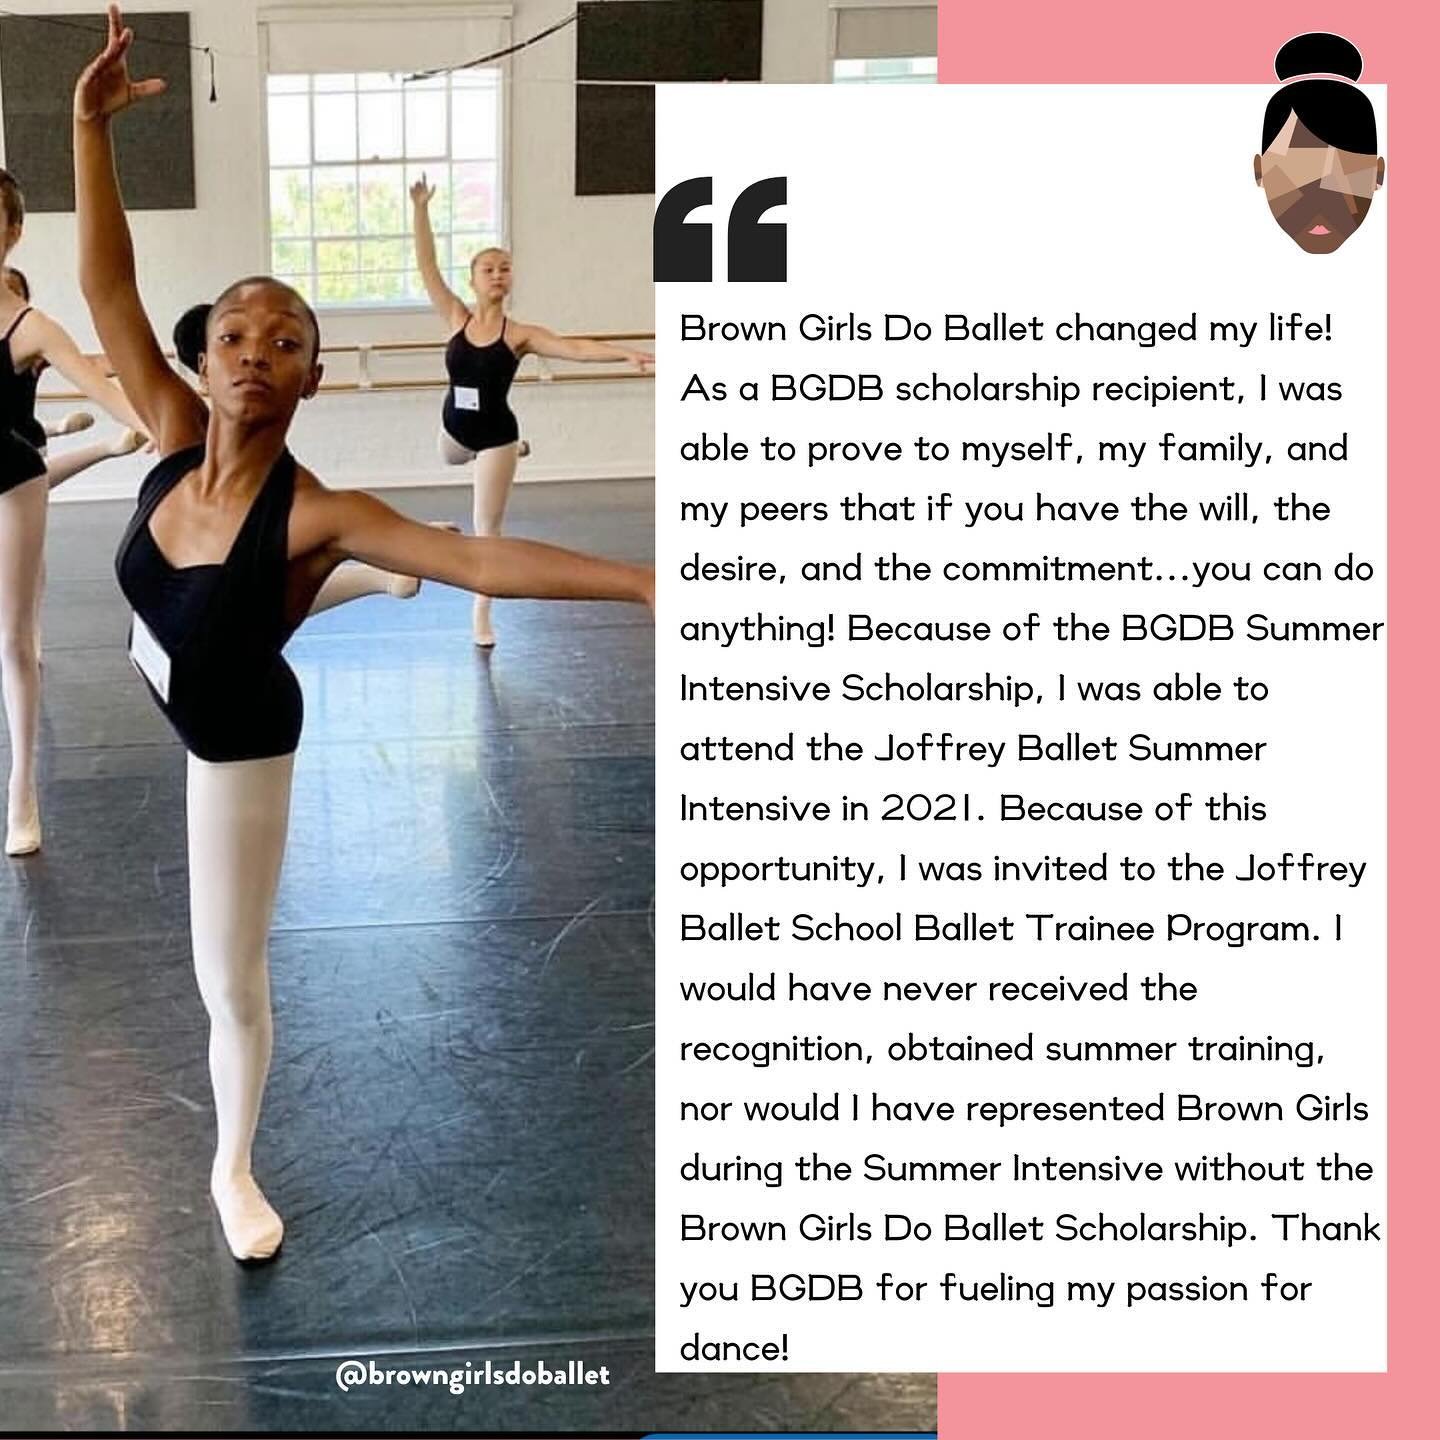 &ldquo;Words cannot express the impact and influence that Brown Girls Do Ballet has had on me and my life!

I was deciding on my Summer Intensive in 2021, auditioned and landed a spot in the summer ballet program of my choice.&nbsp; My mom had recent